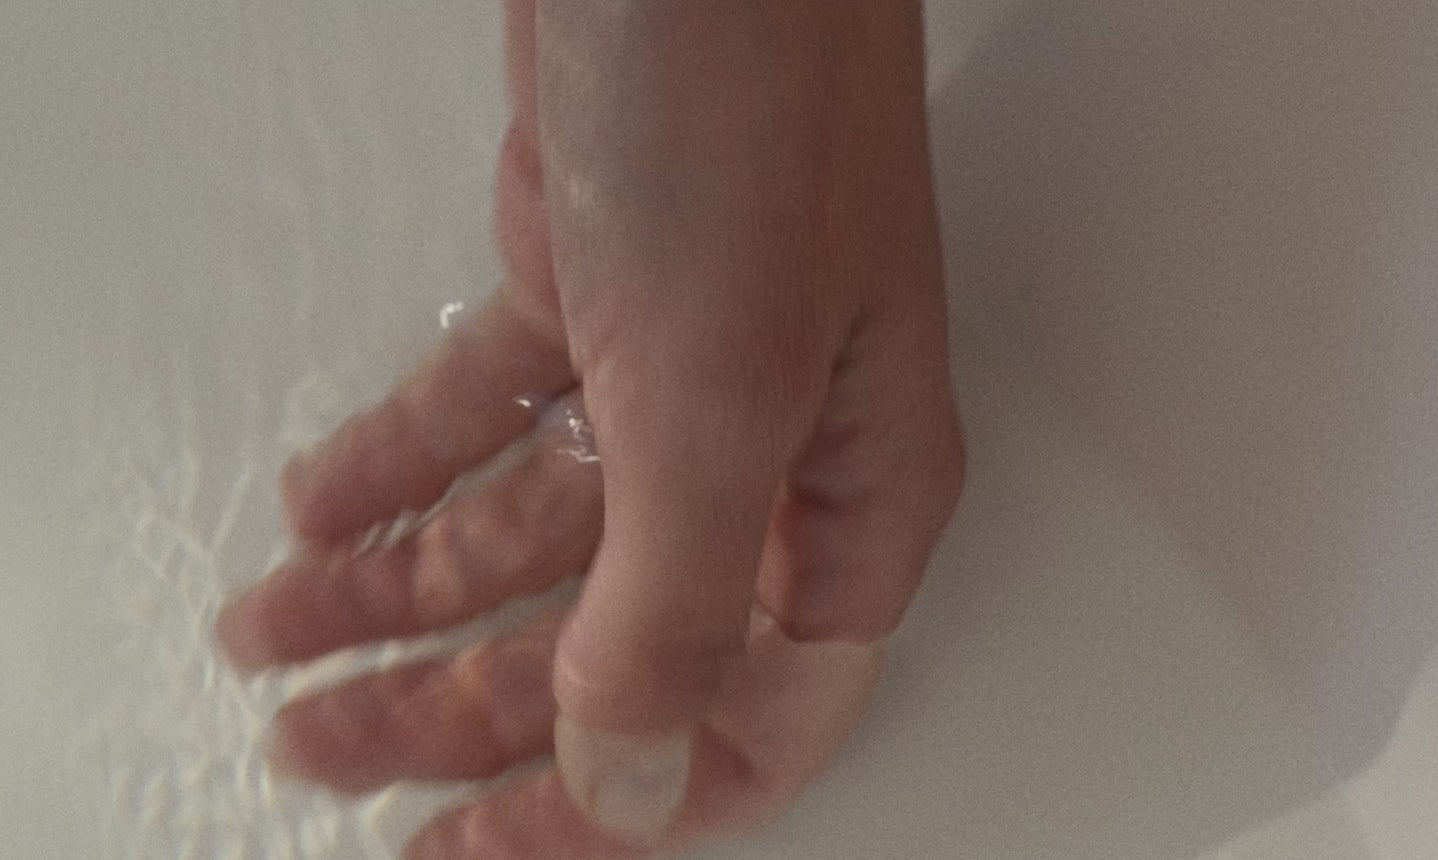 Load video: &lt;p&gt;&lt;span class=&quot;metafield-multi_line_text_field&quot;&gt;Work up a rich lather in wet hands and massage hands and/or body thoroughly before rinsing off with water.&lt;/span&gt;&lt;/p&gt;